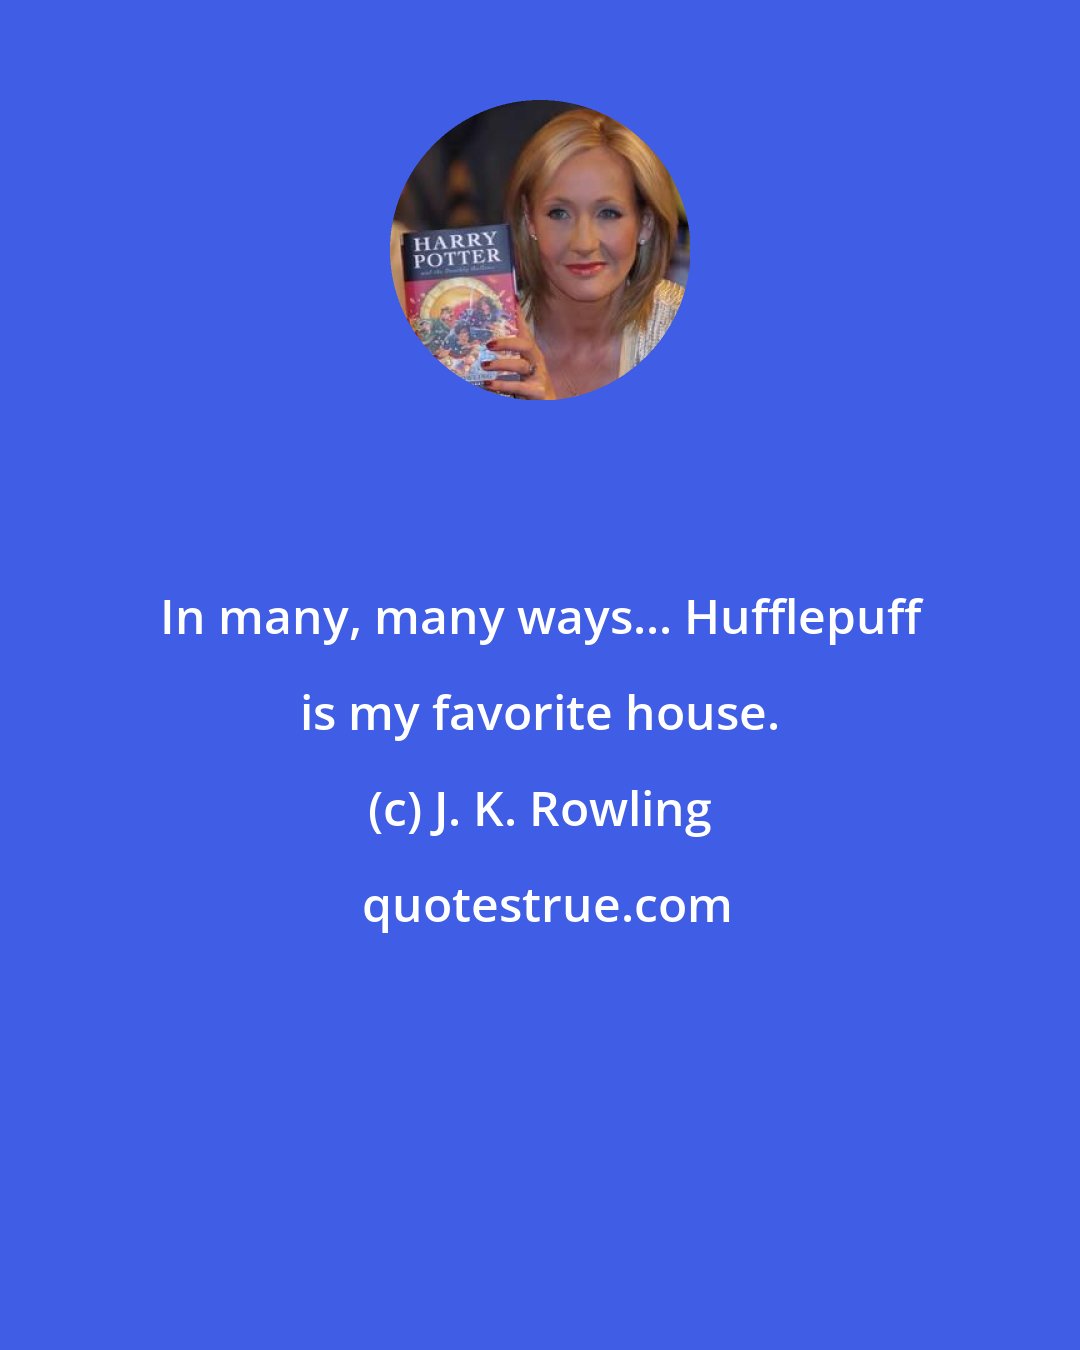 J. K. Rowling: In many, many ways... Hufflepuff is my favorite house.